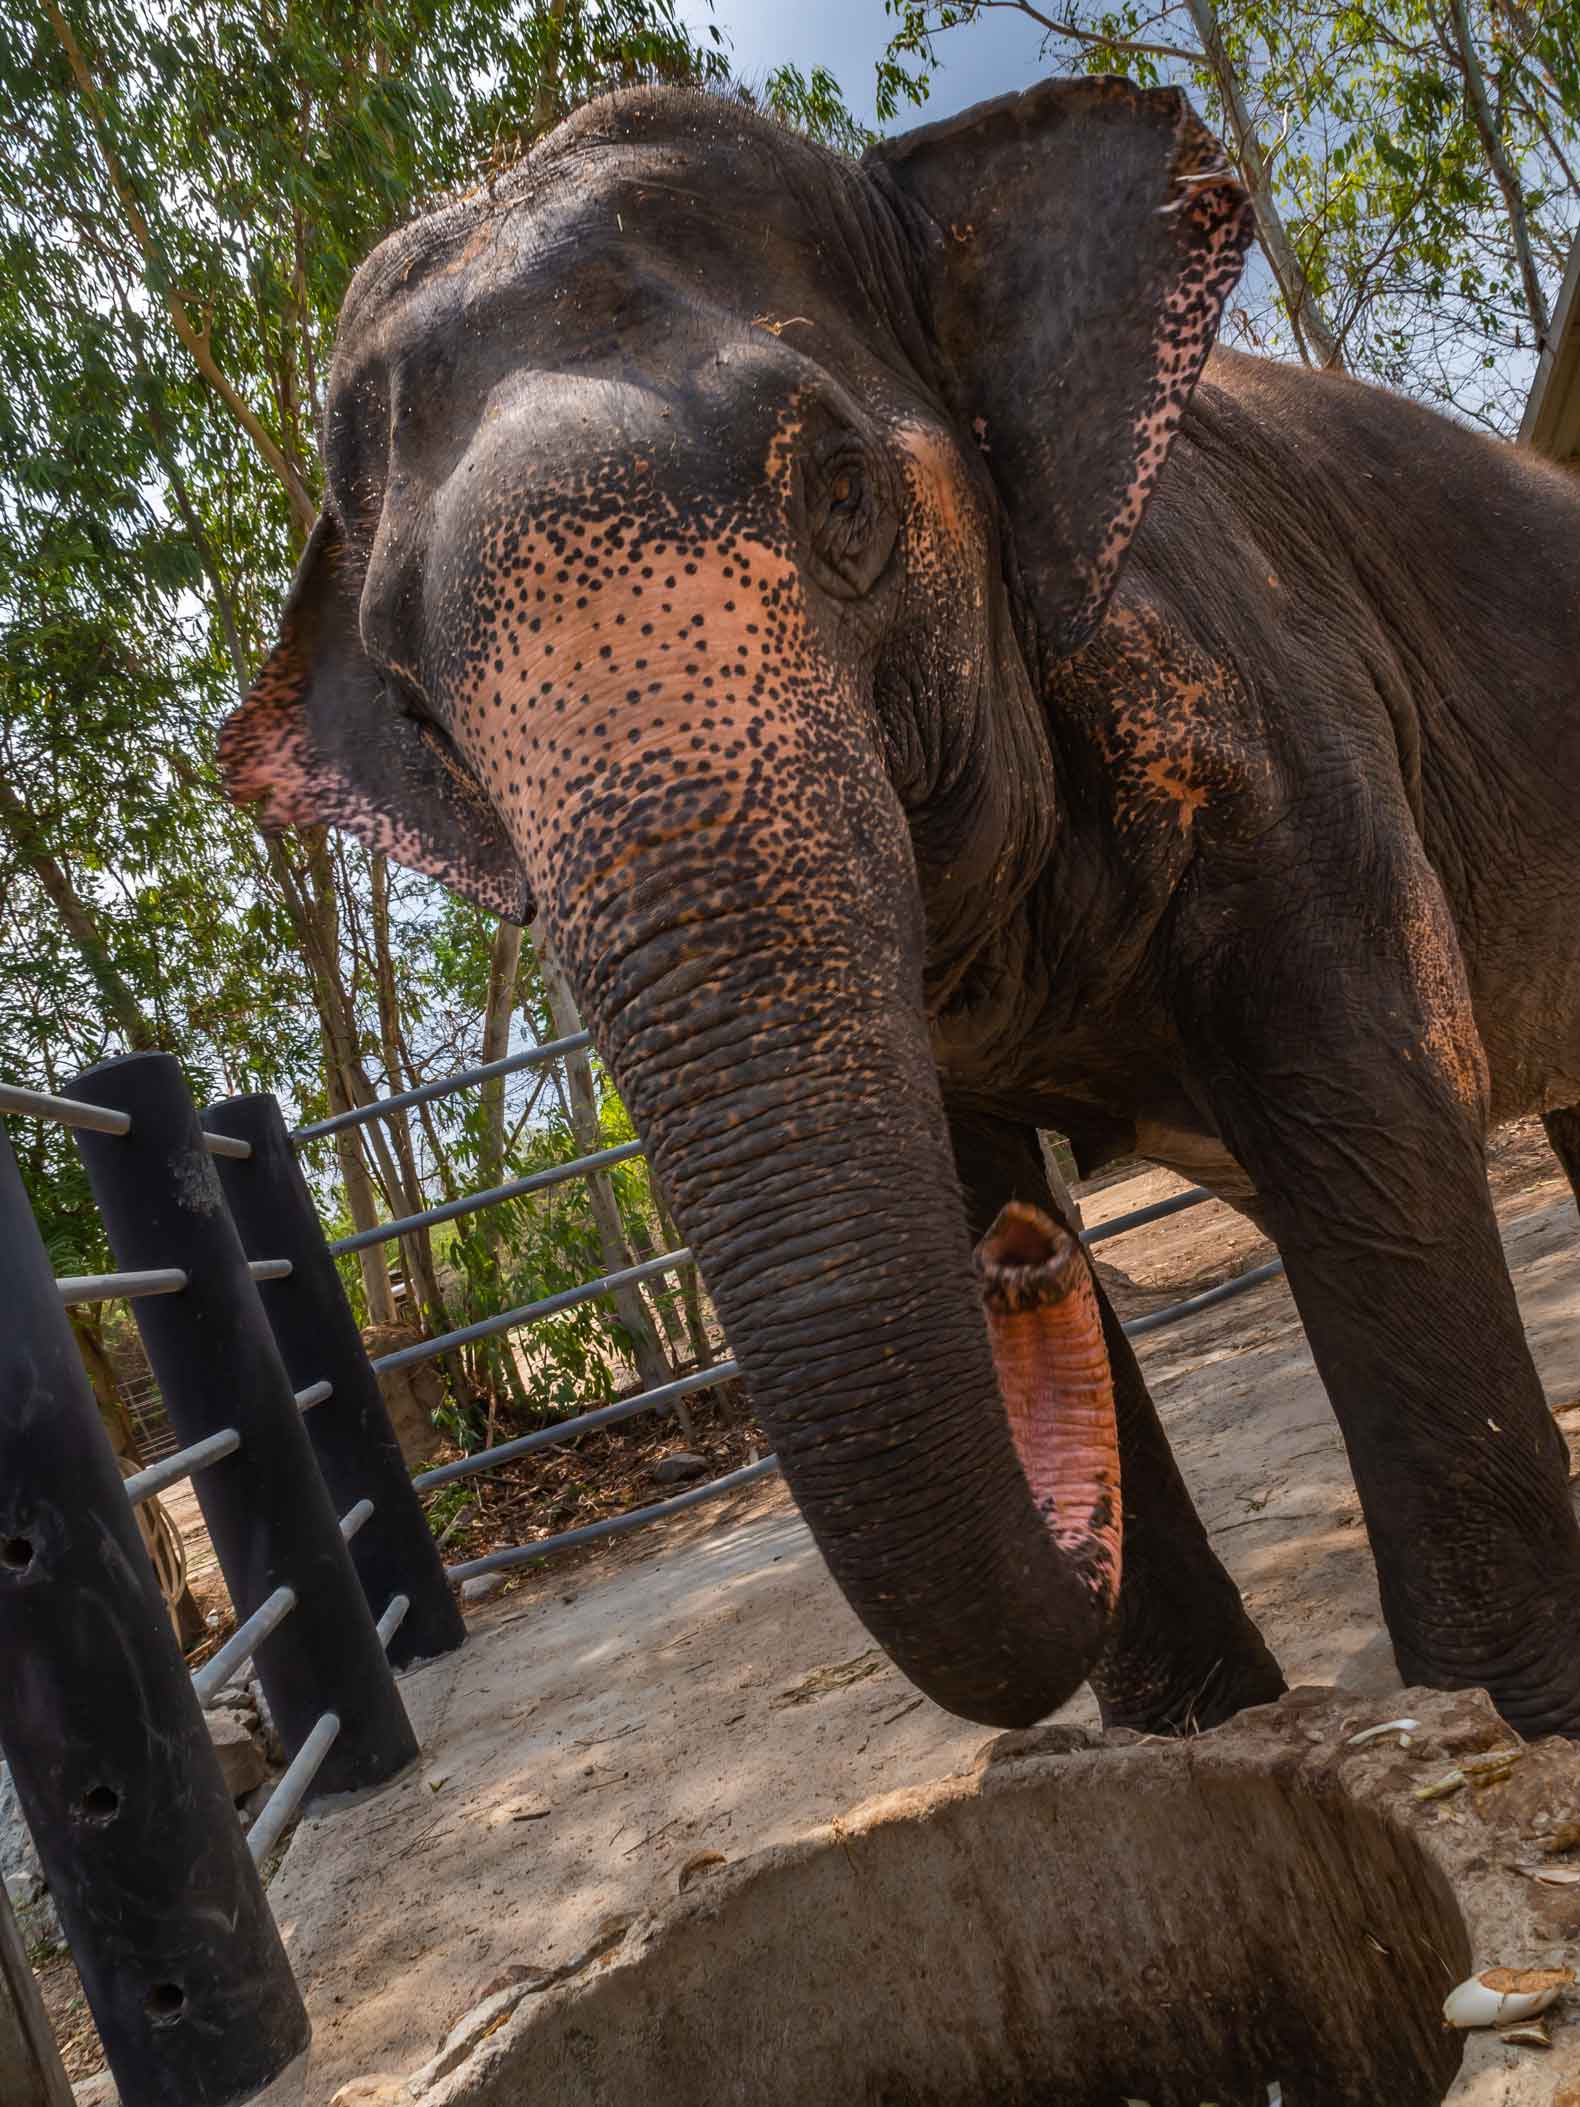 Elephant up close at the WFFT elephant sanctuary in Thailand - responsible elephant tourism